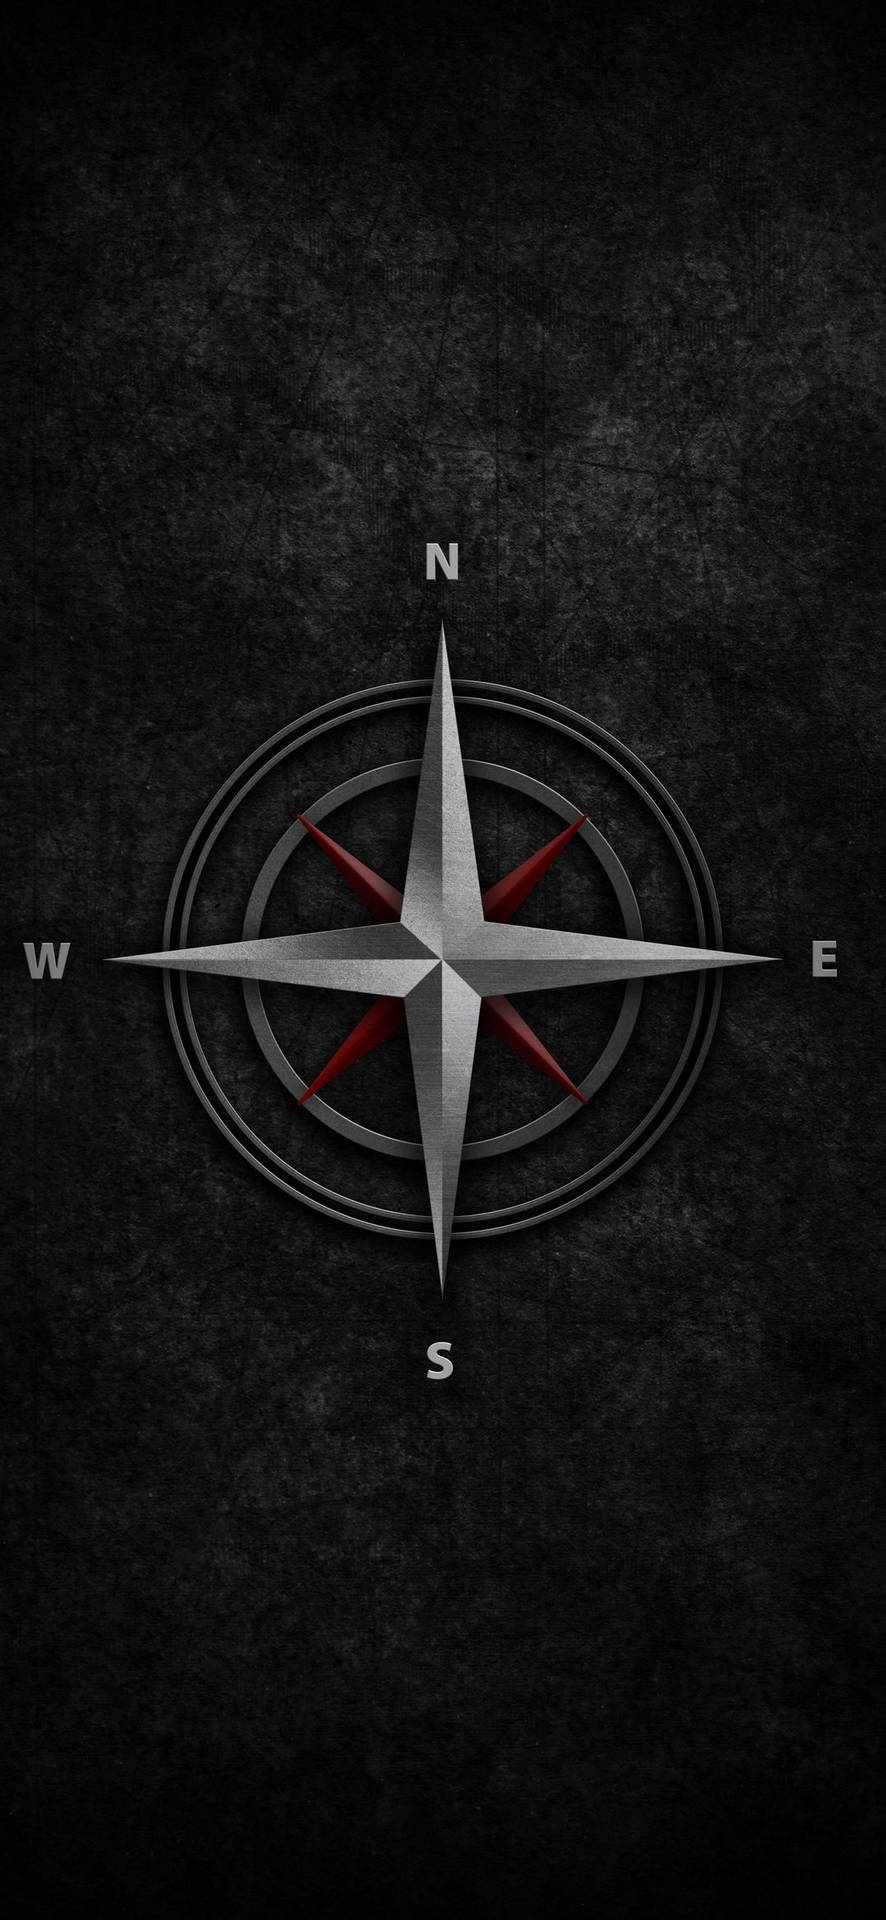 Download Free Android Wallpaper Compass - 4064 - MobileSMSPK.net